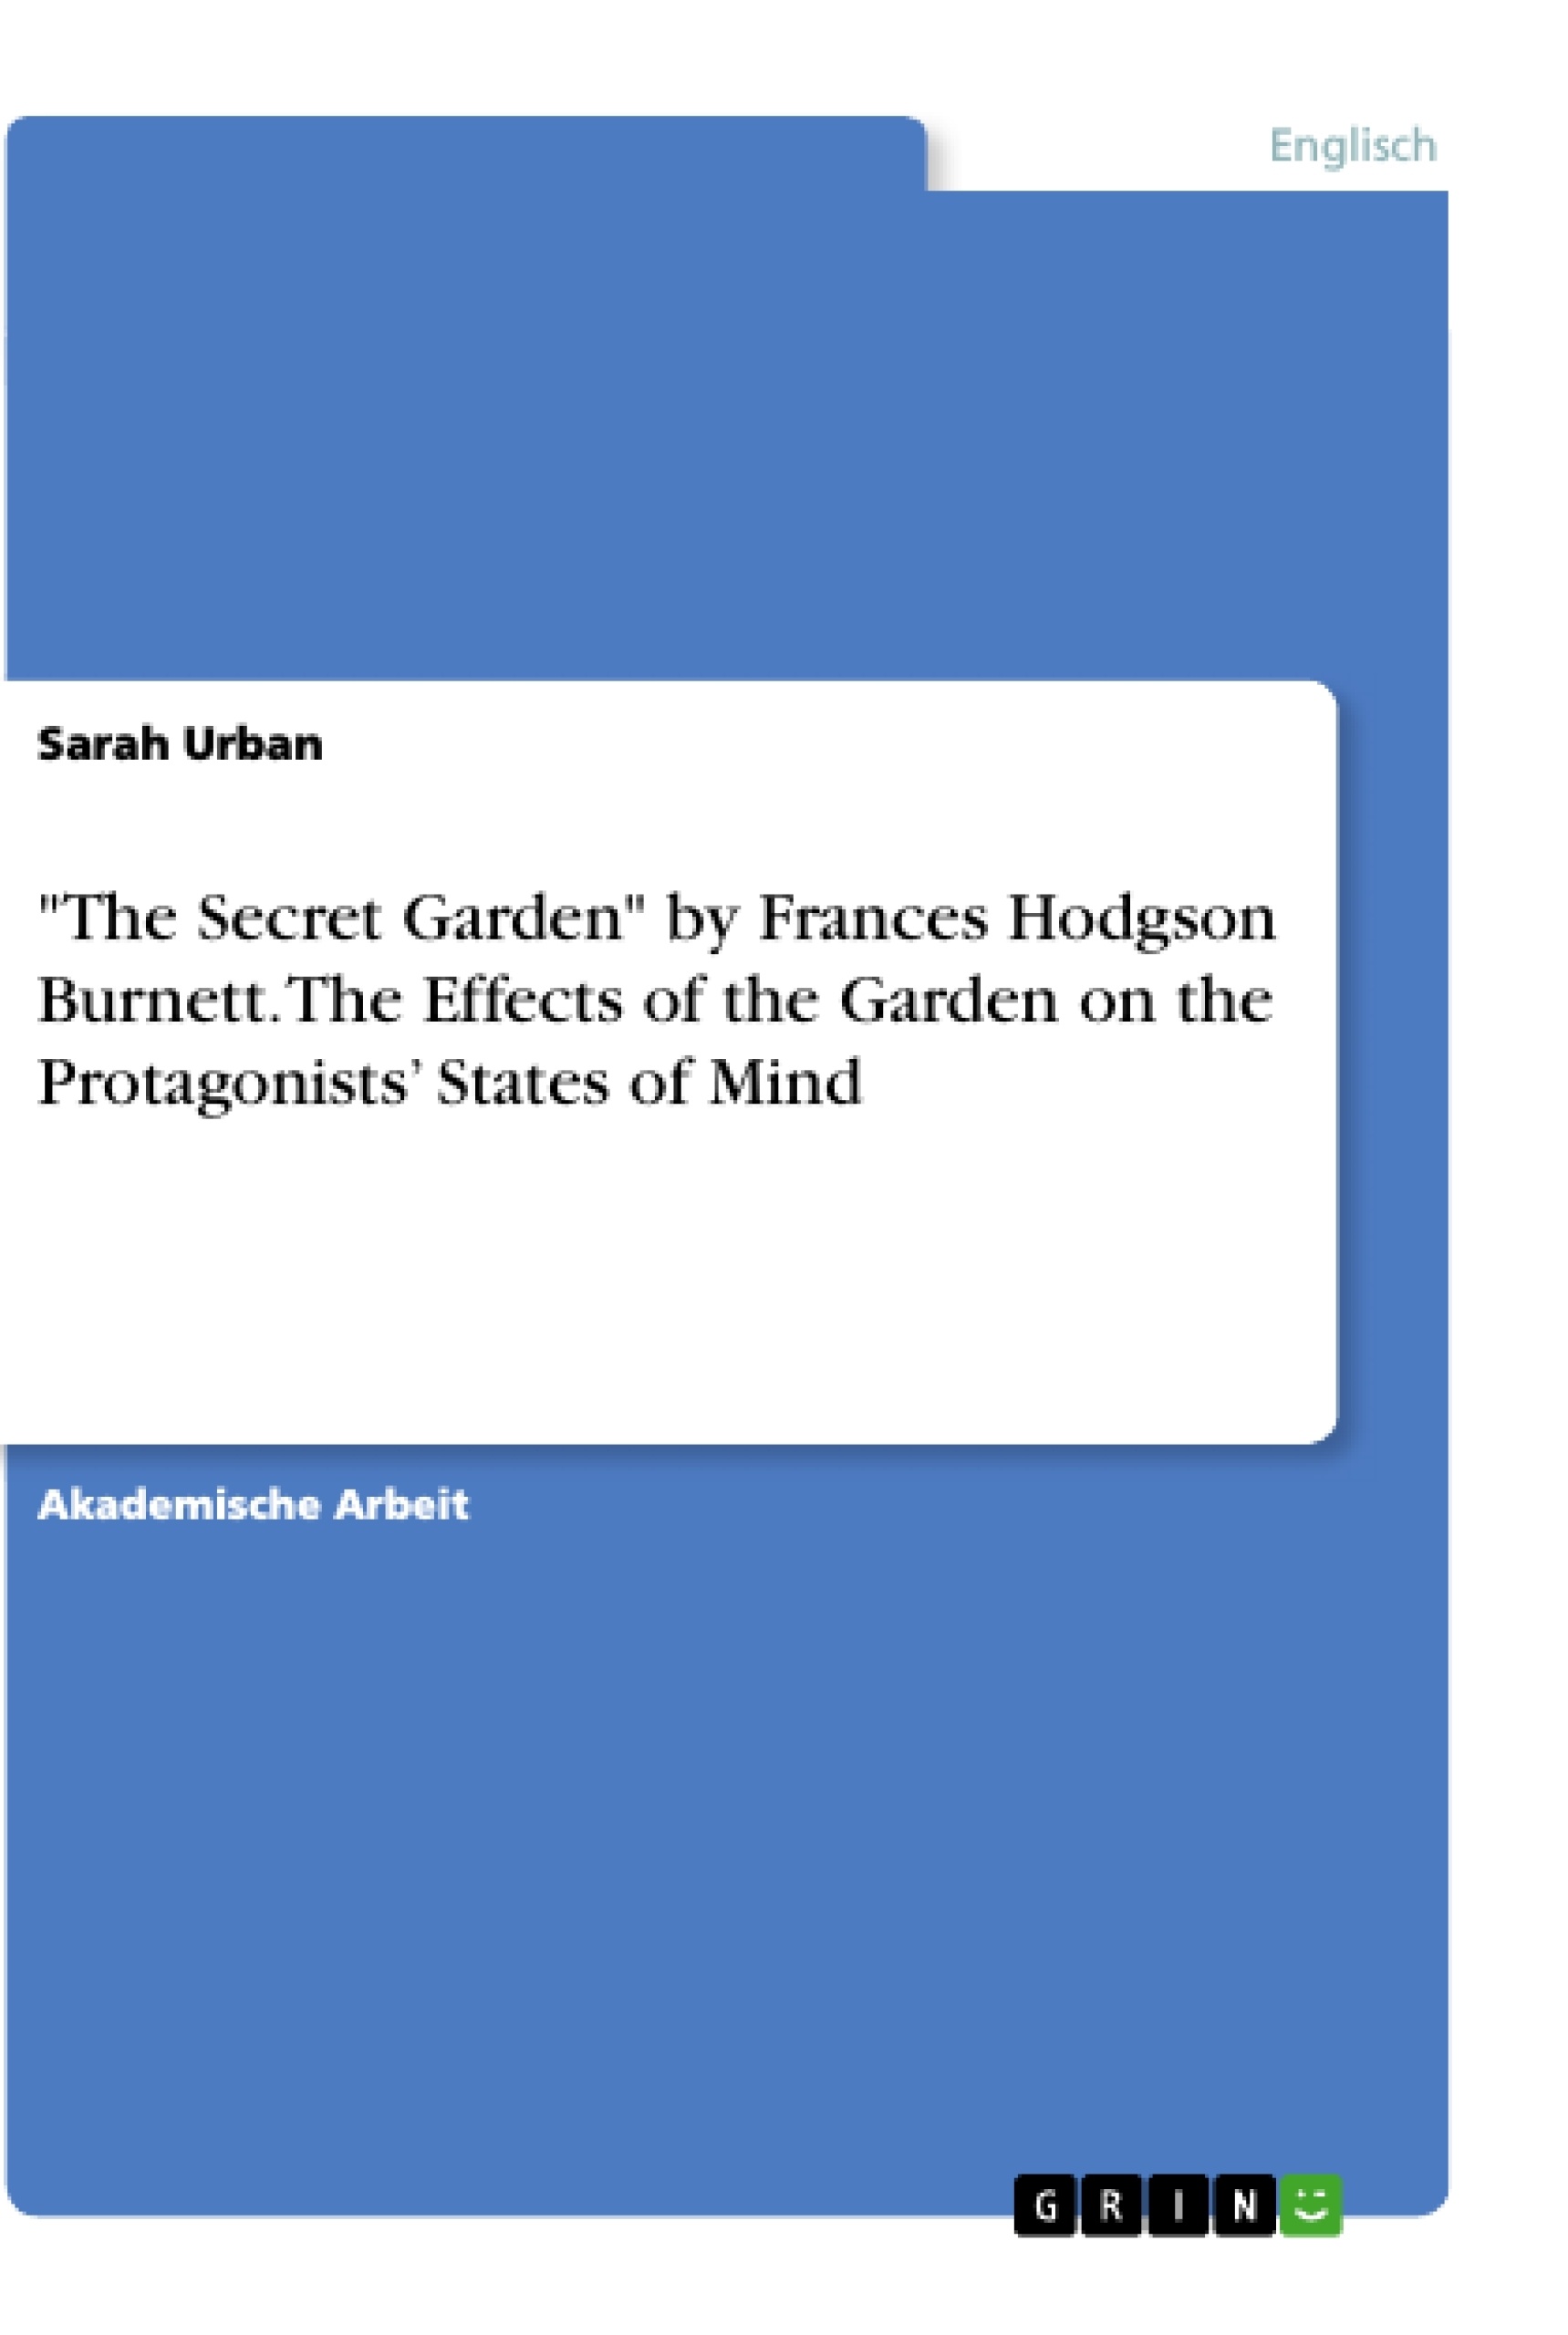 Titel: "The Secret Garden" by Frances Hodgson Burnett. The Effects of the Garden on the Protagonists’ States of Mind